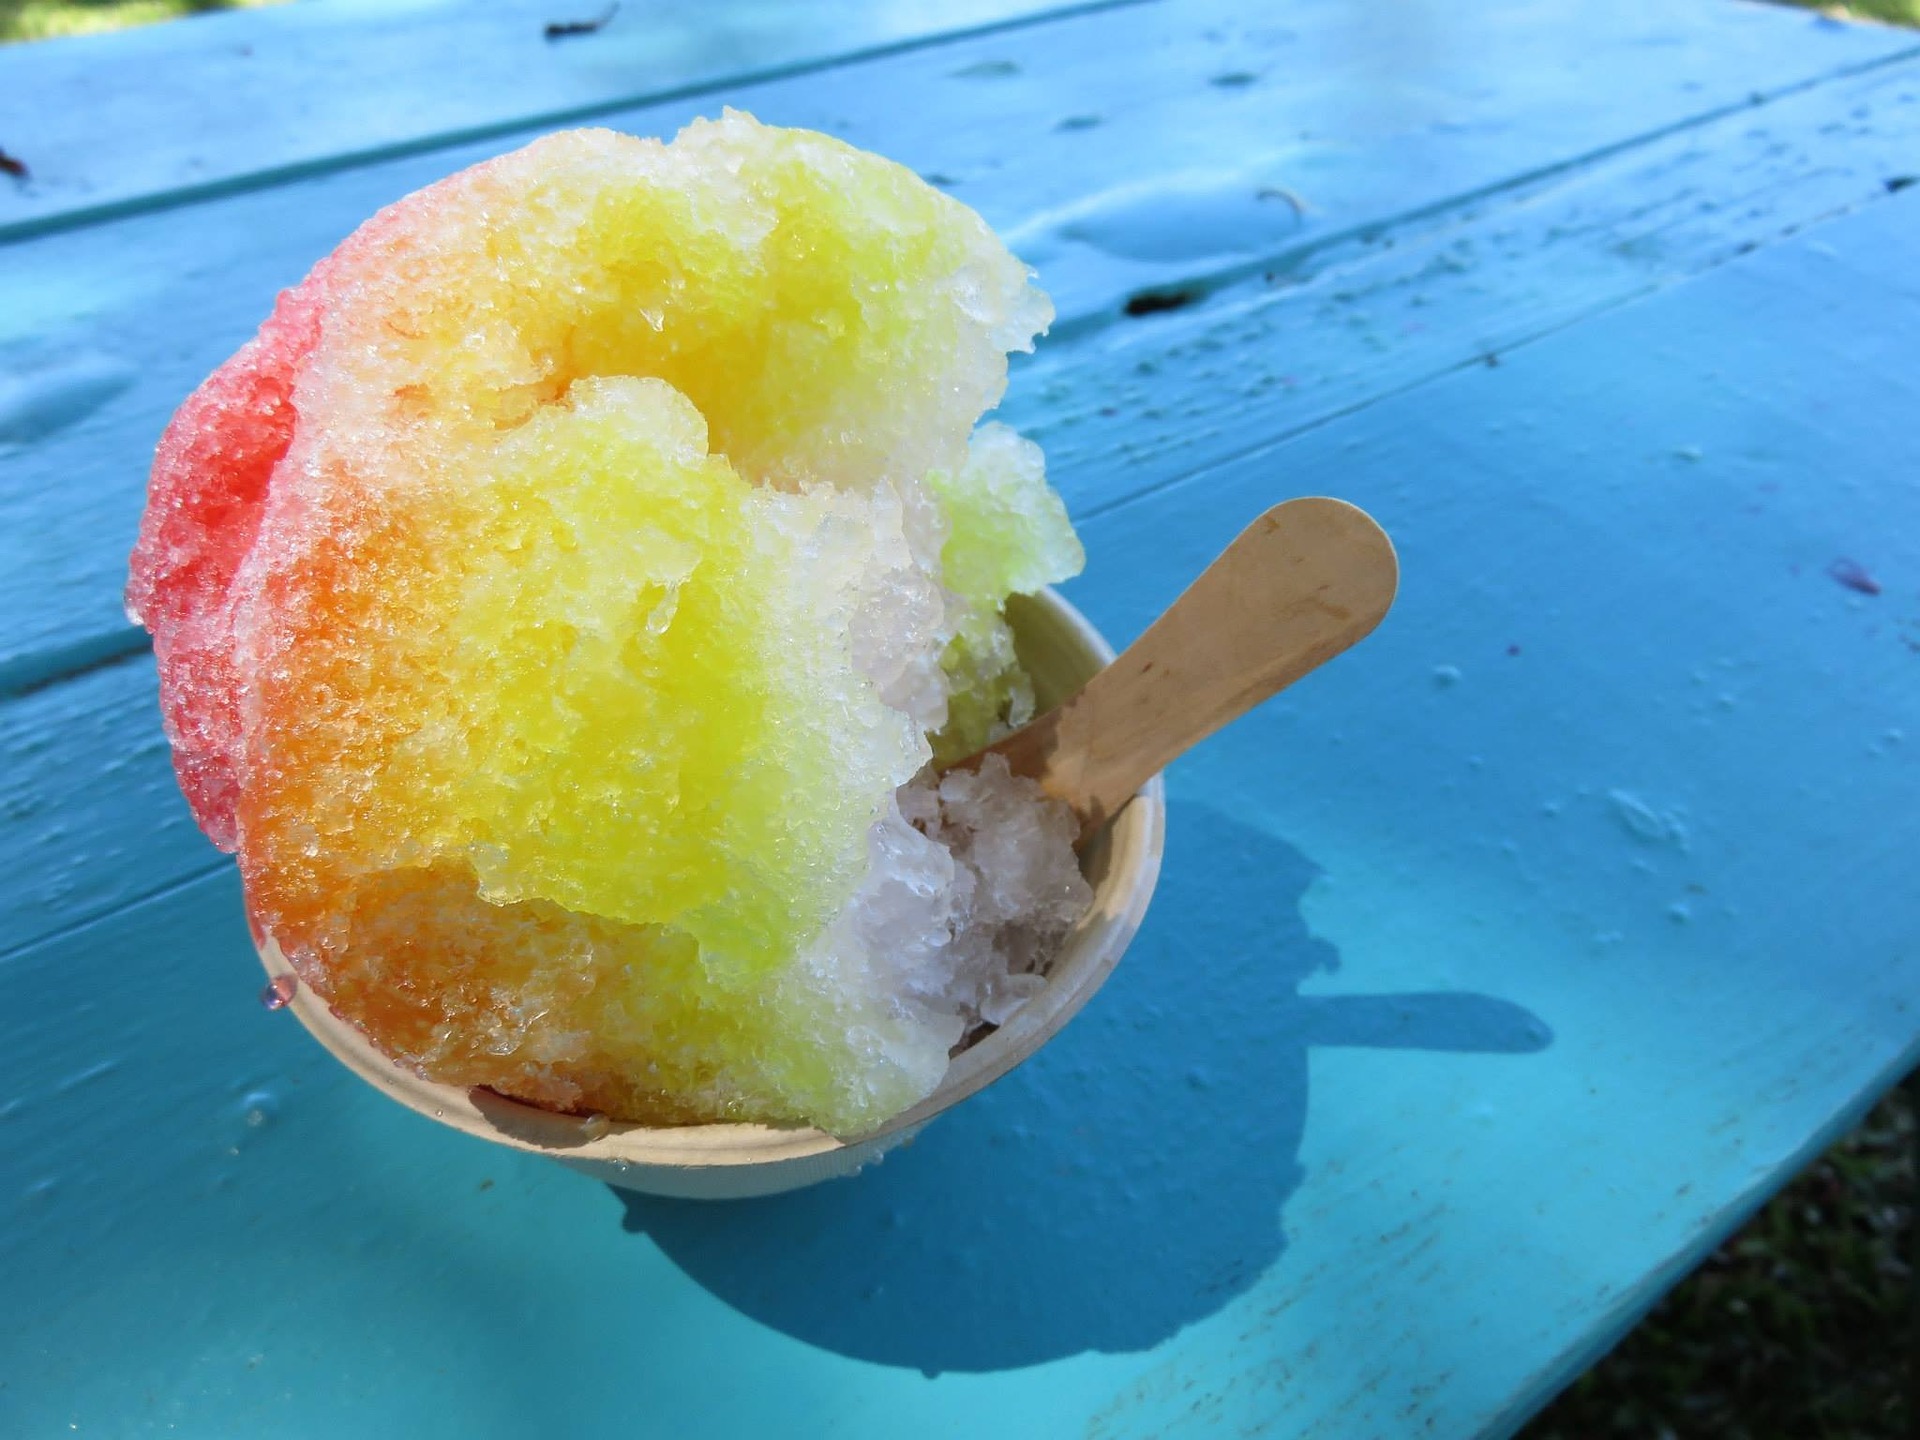 Shave ice